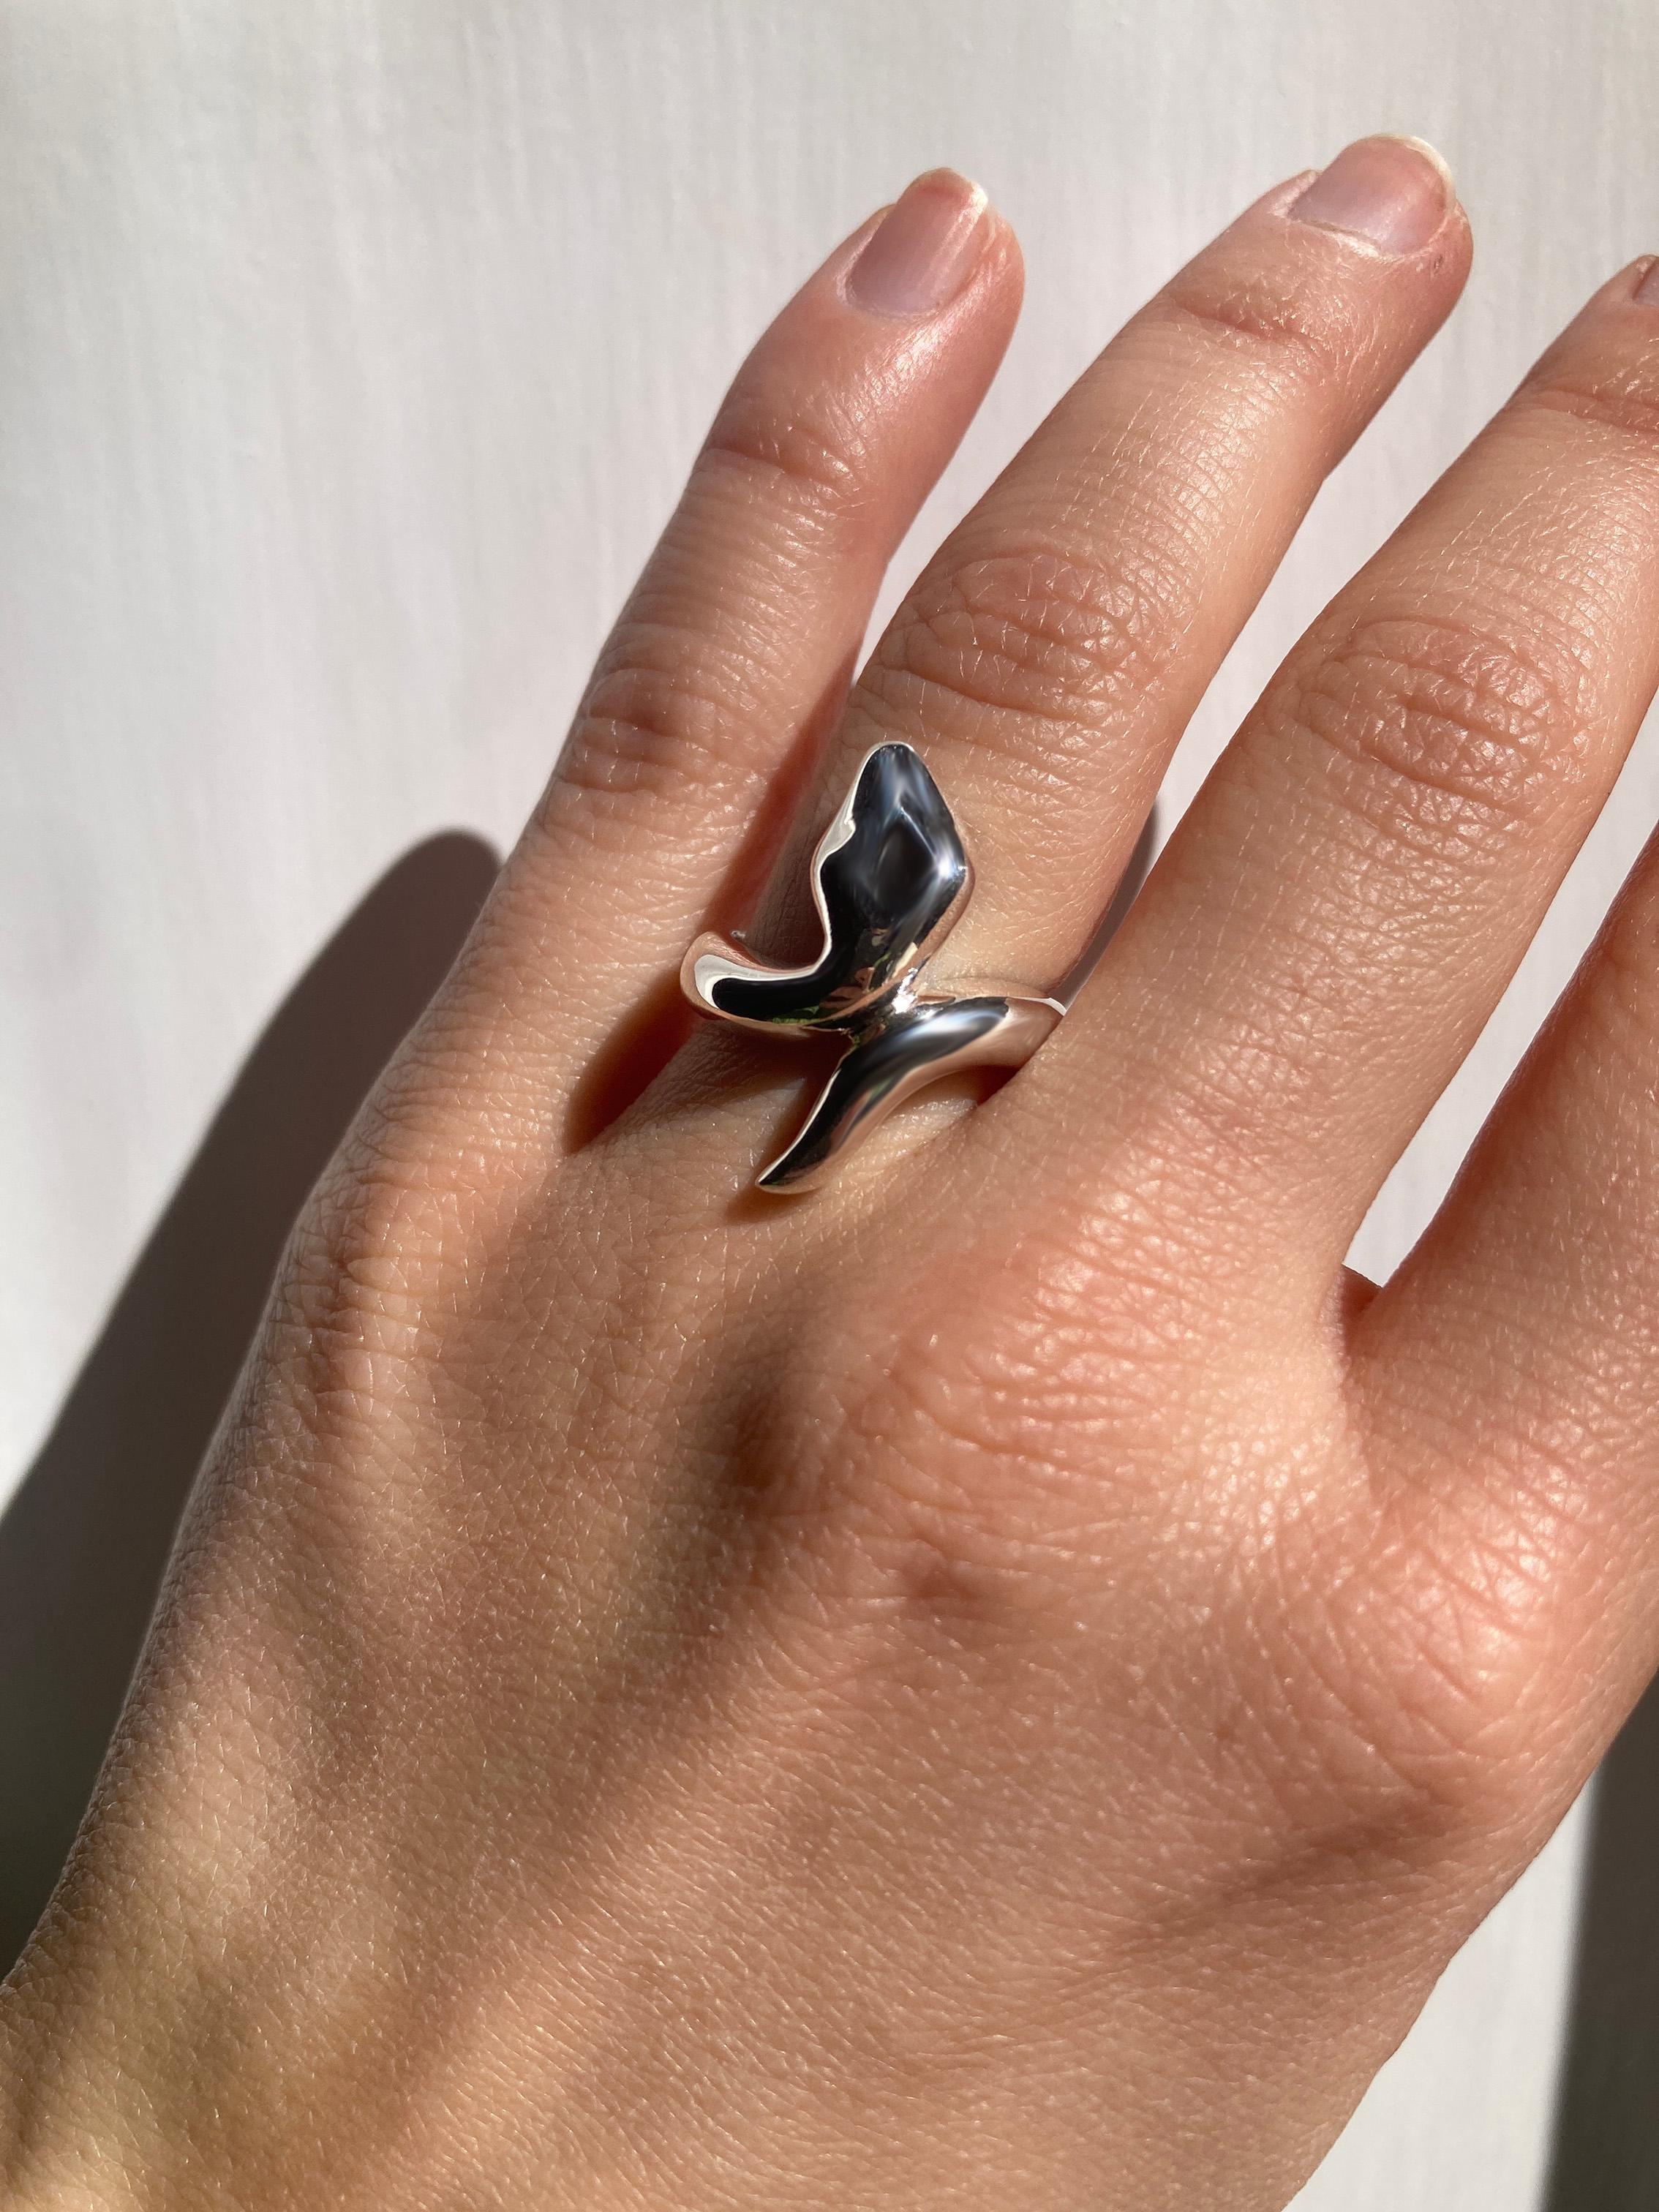 Rossella Ugolini Bold Snake ring, handcrafted in Platinum.
The sinuous form of the snake,  is coiled around the finger with its head and tail connected in a single line, imparting dynamic movement to the hand. 
Symbolizes resilience, transformation,